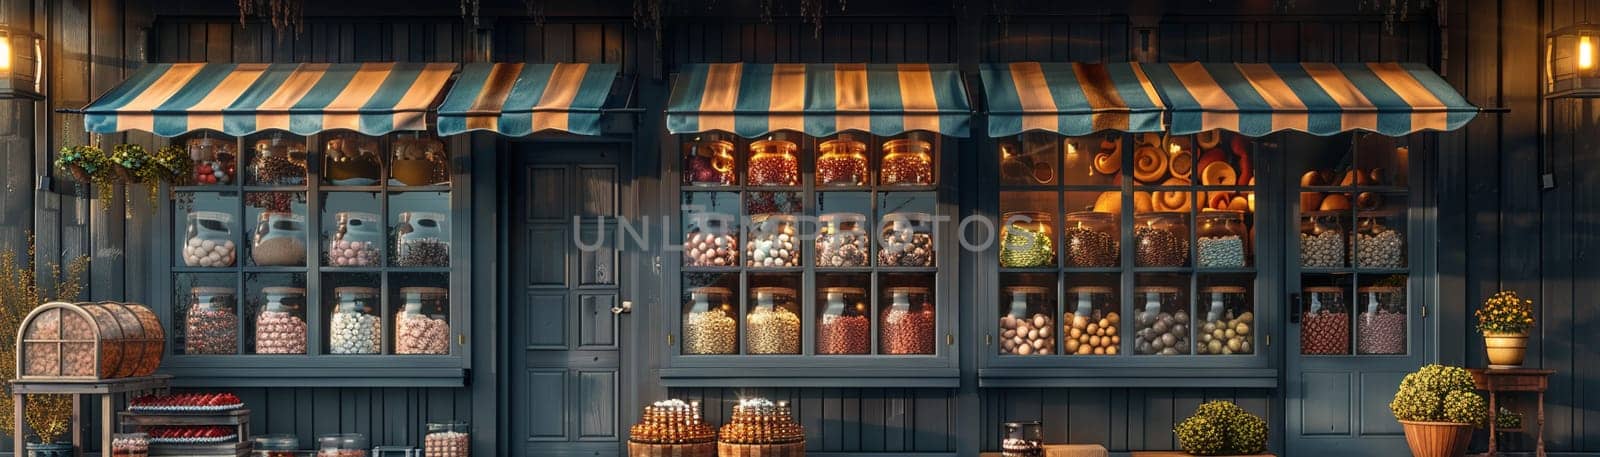 Old-fashioned candy shop with jars of sweets and a striped awning3D render by Benzoix